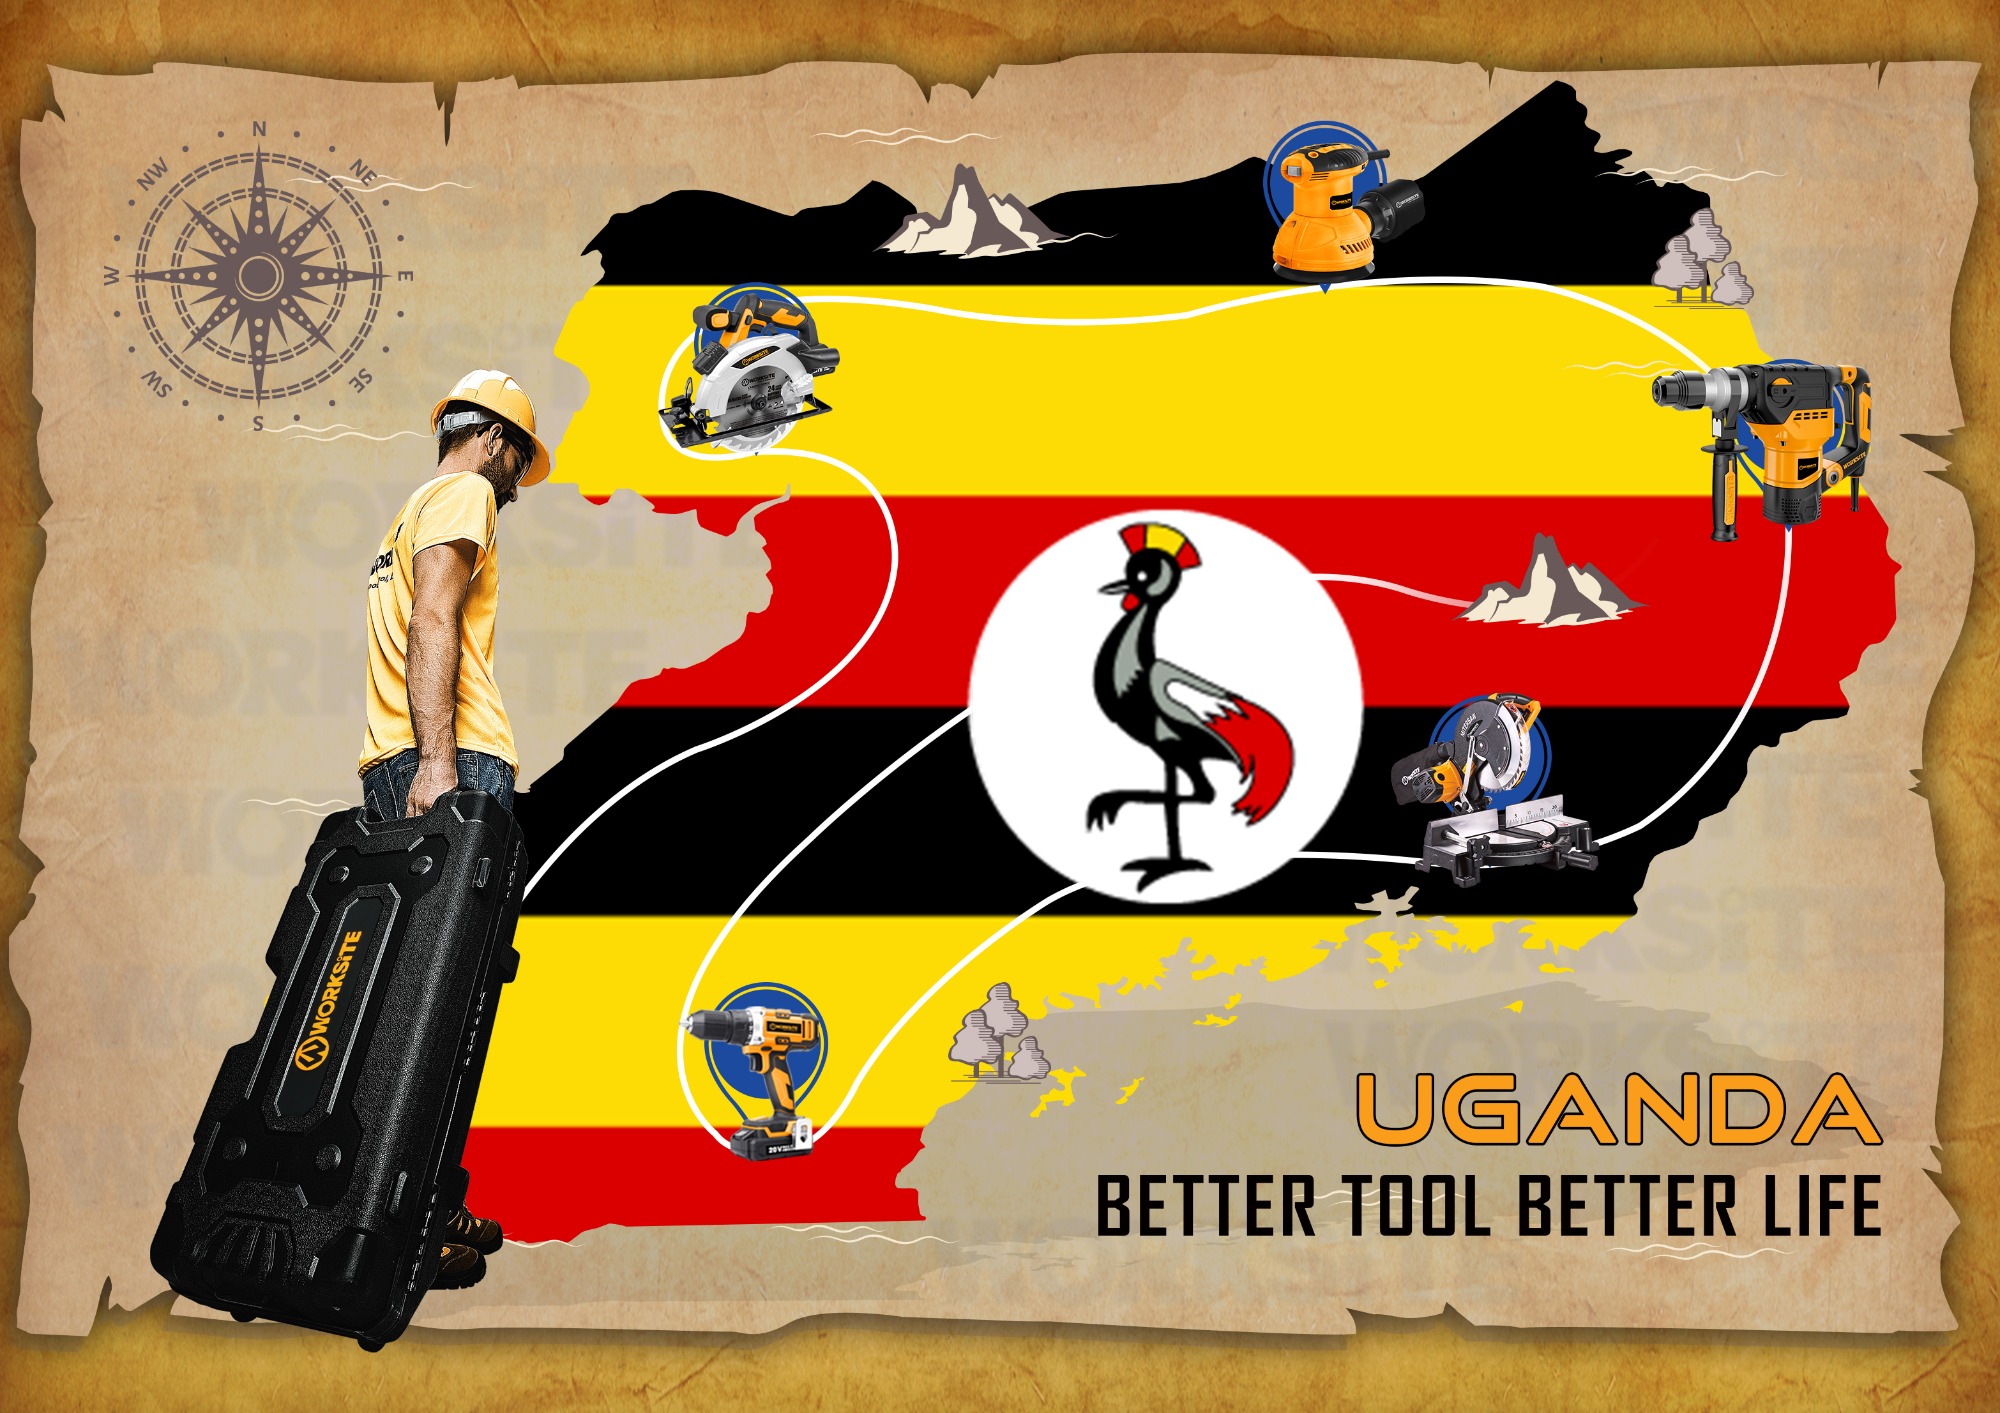 The Fourth Stop: Business trip to visit customers in Uganda